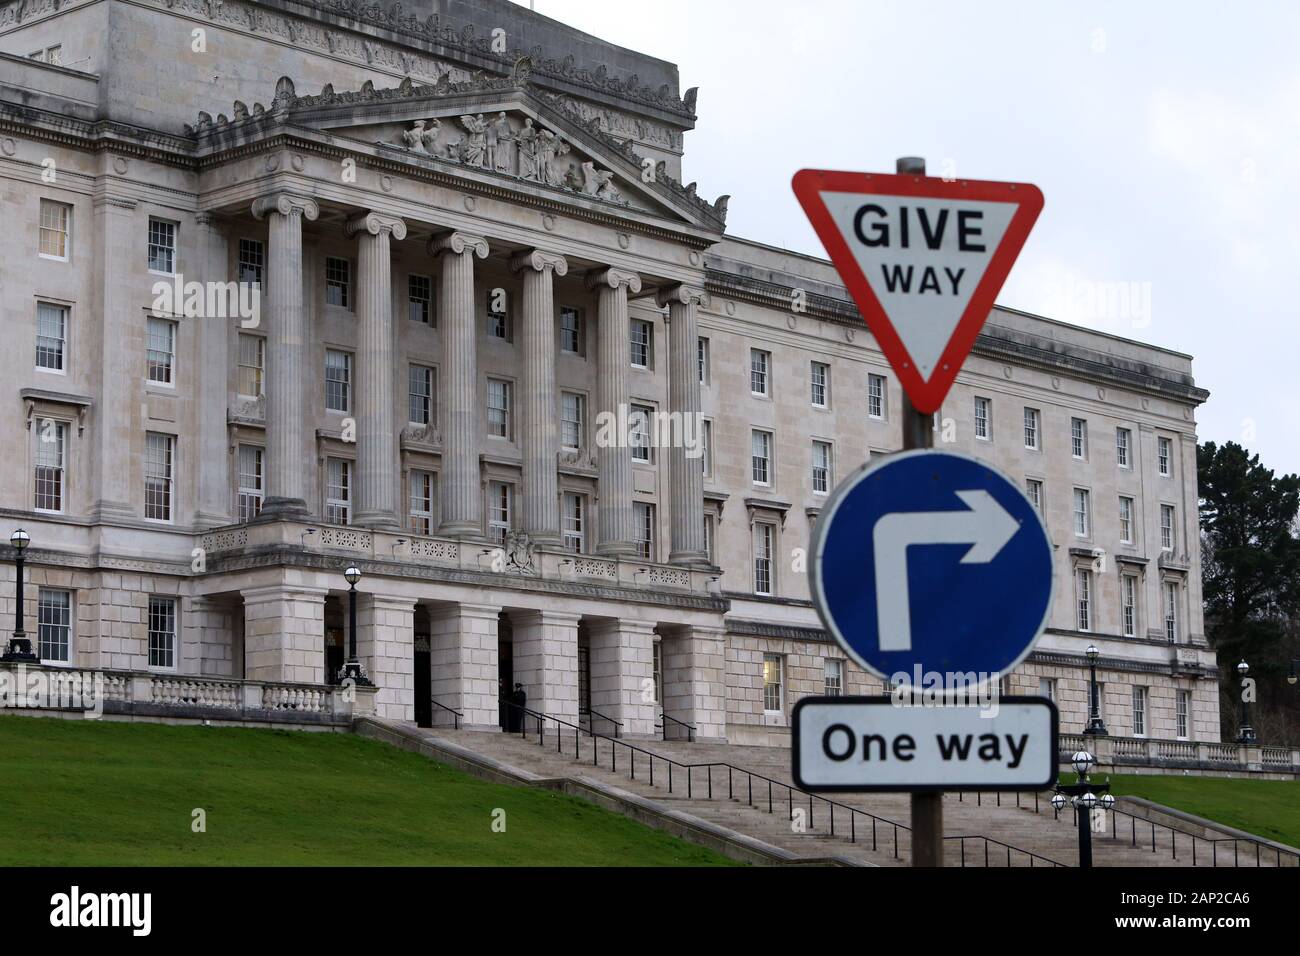 The Parliament Buildings at Stormont are pictured in Belfast on January 14, 2020. Parliament Buildings, often referred to as Stormont because of its location in the Stormont Estate area of Belfast, is the seat of the Northern Ireland Assembly, the devolved legislature for the region. The Executive or government is located at Stormont Castle. Photo/Paul McErlane (www.paulmcerlane.net) Stock Photo